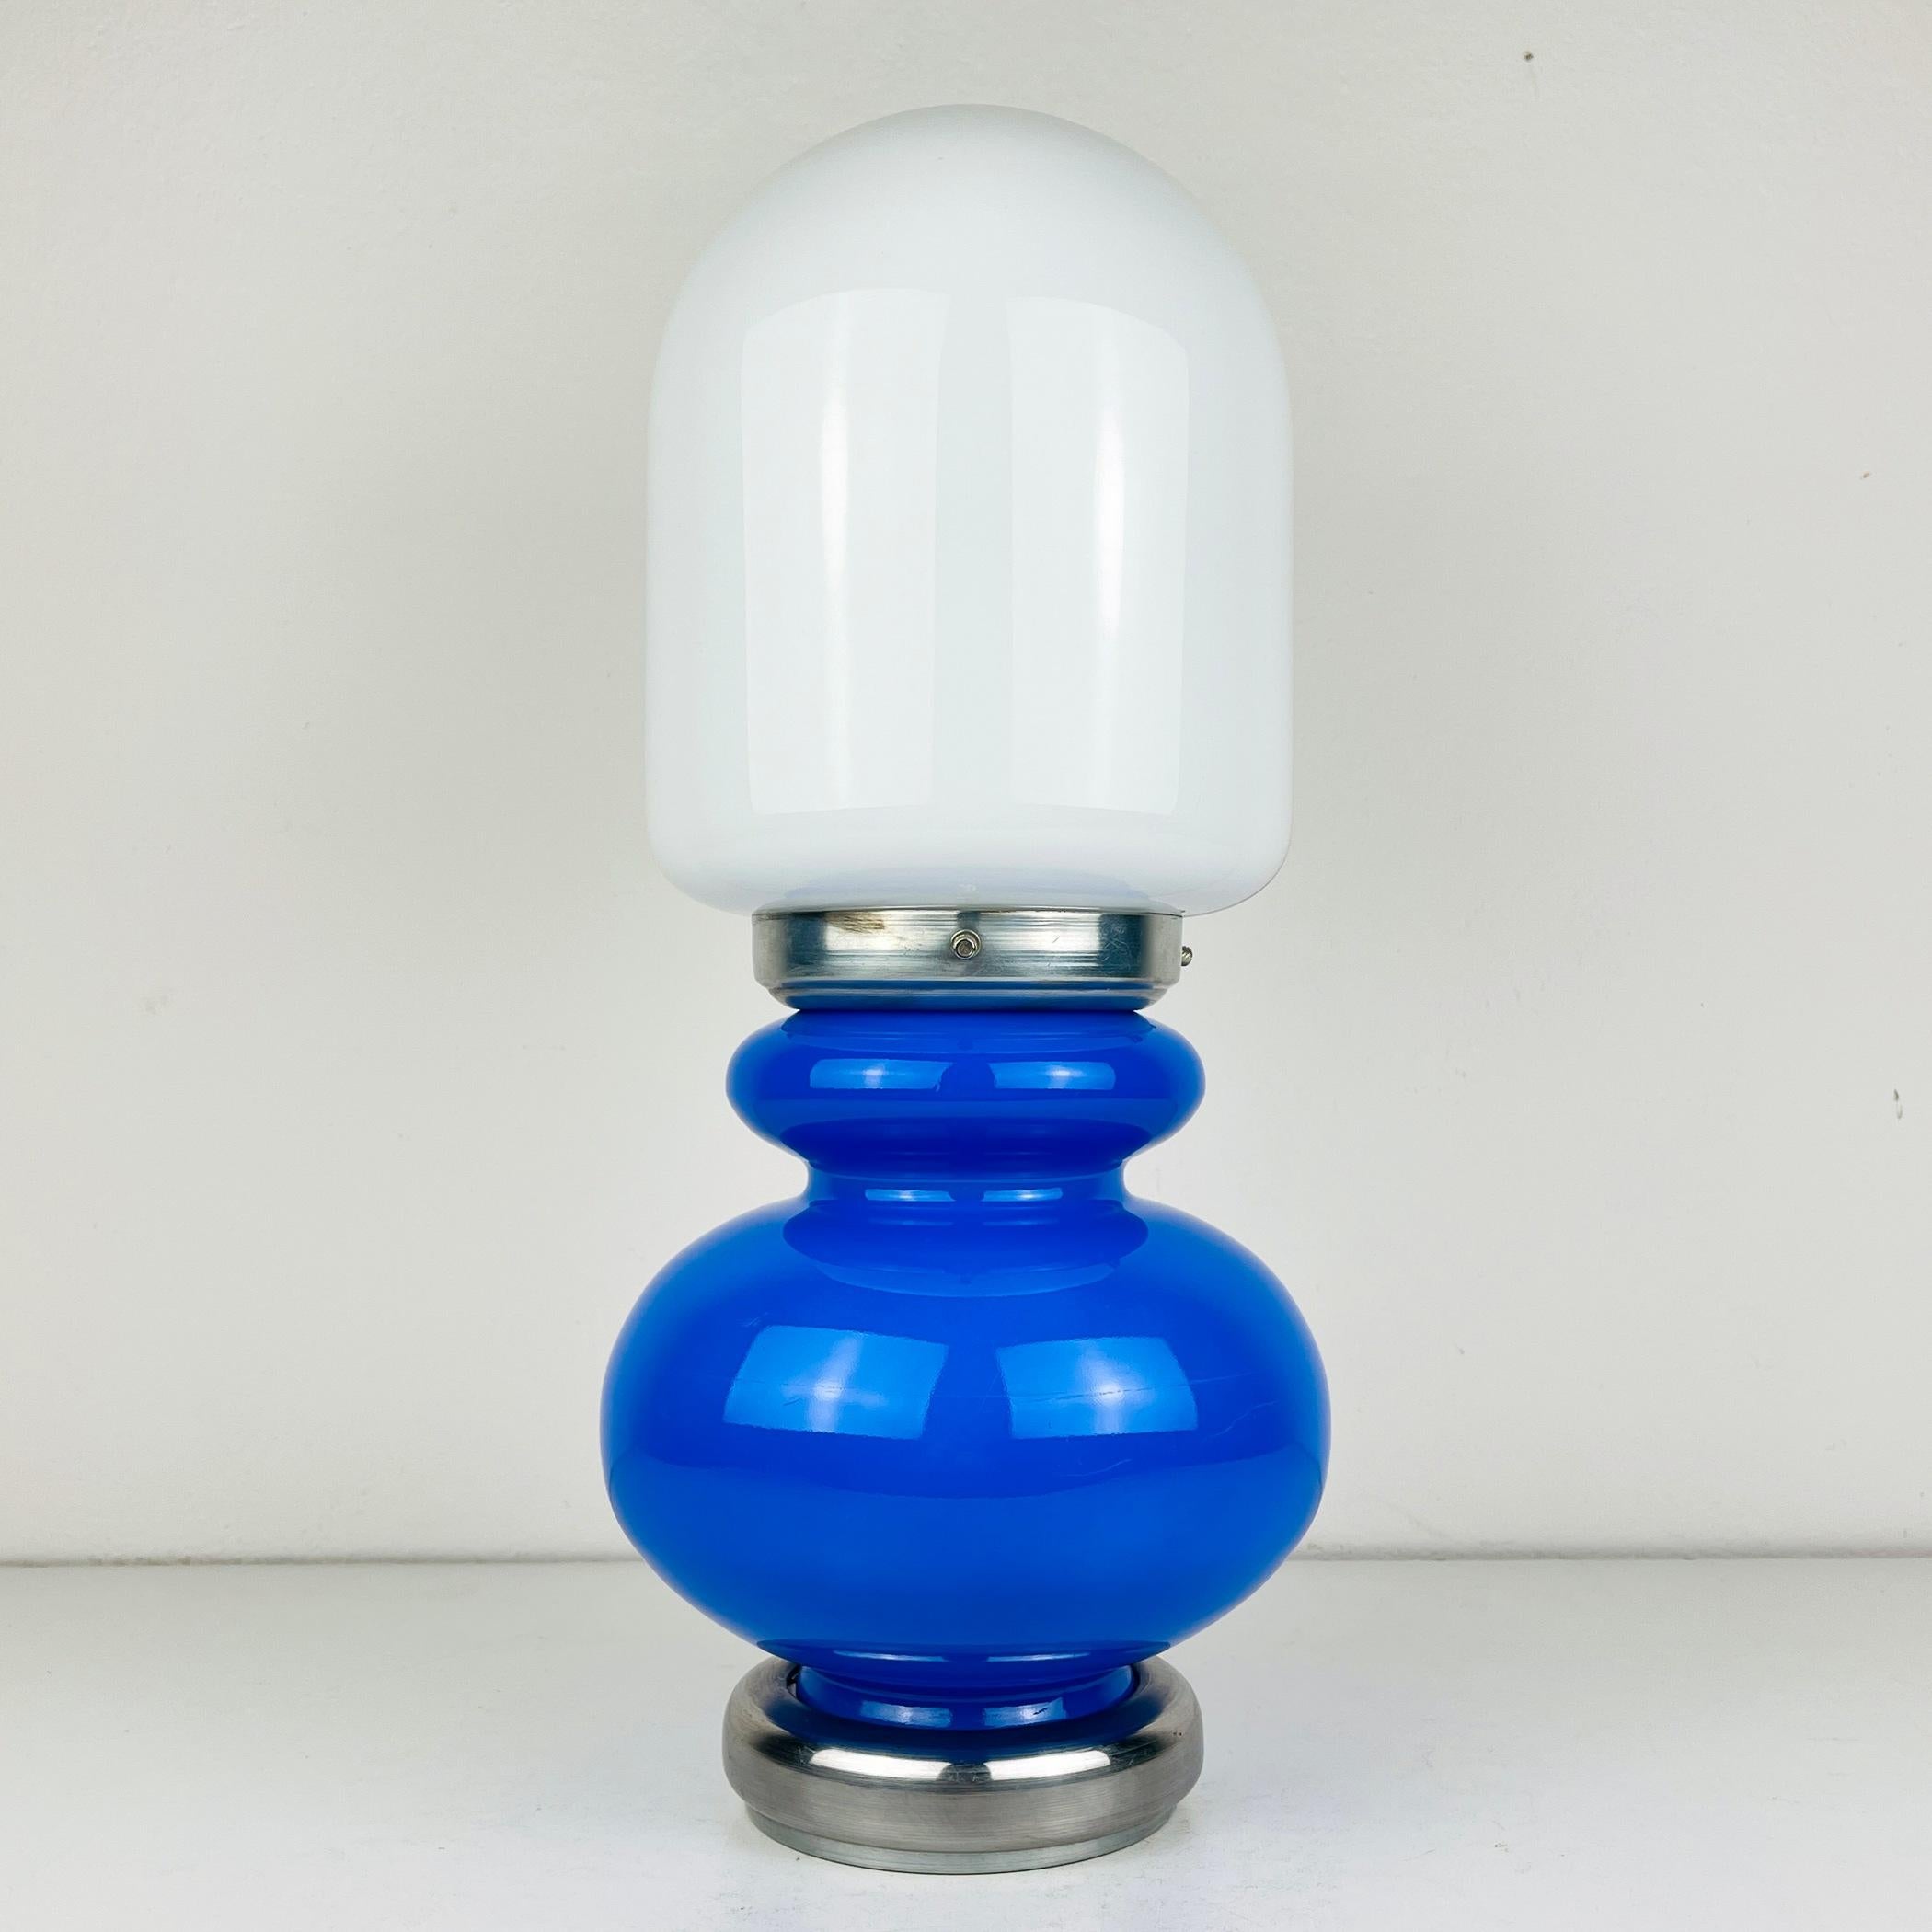 Vintage table lamp Italy 1980s For Sale 5